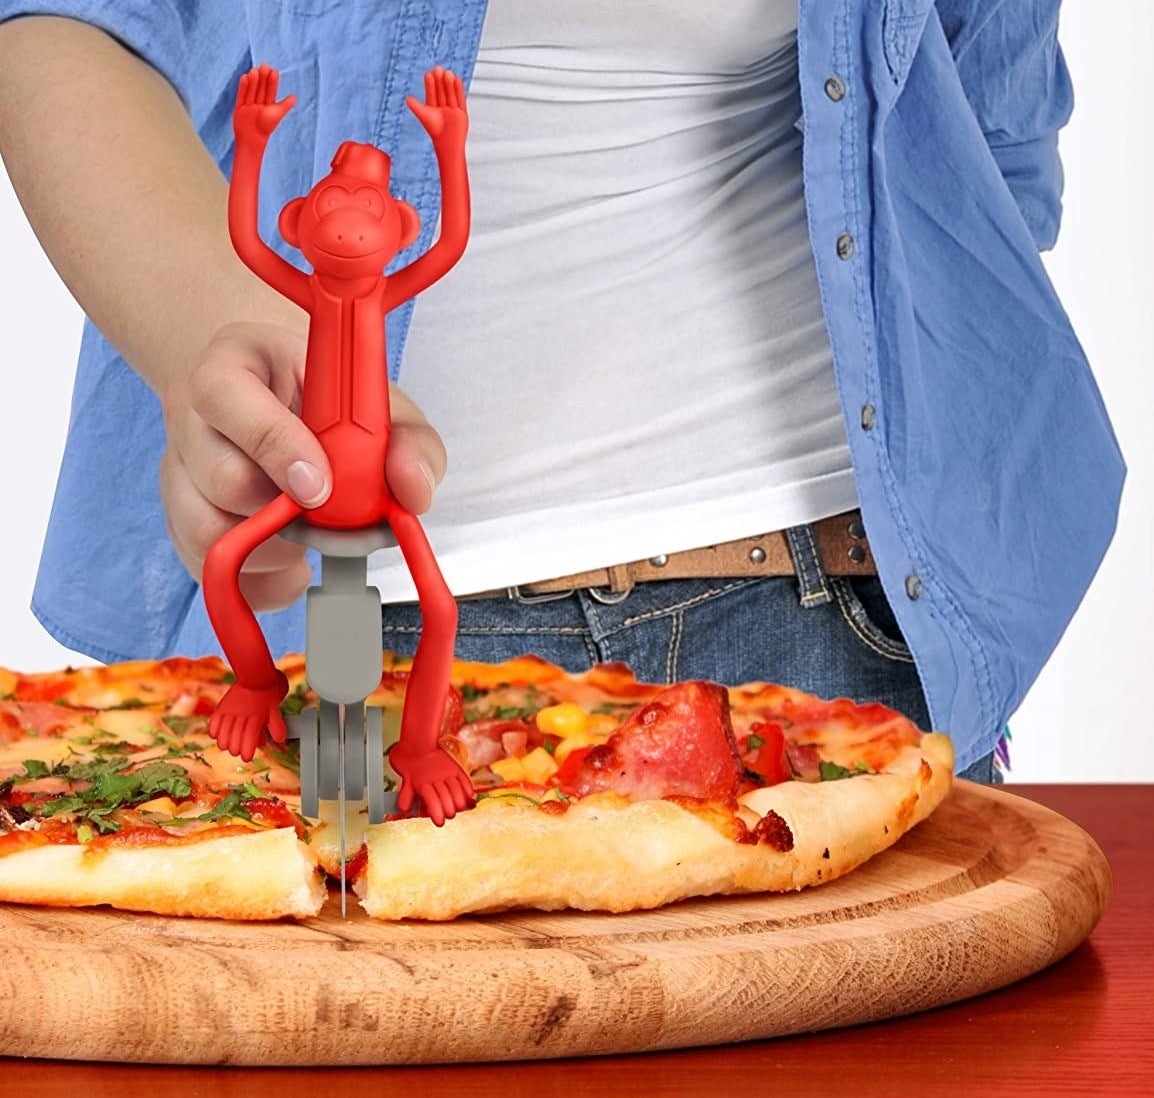 A person cutting a pizza using the product